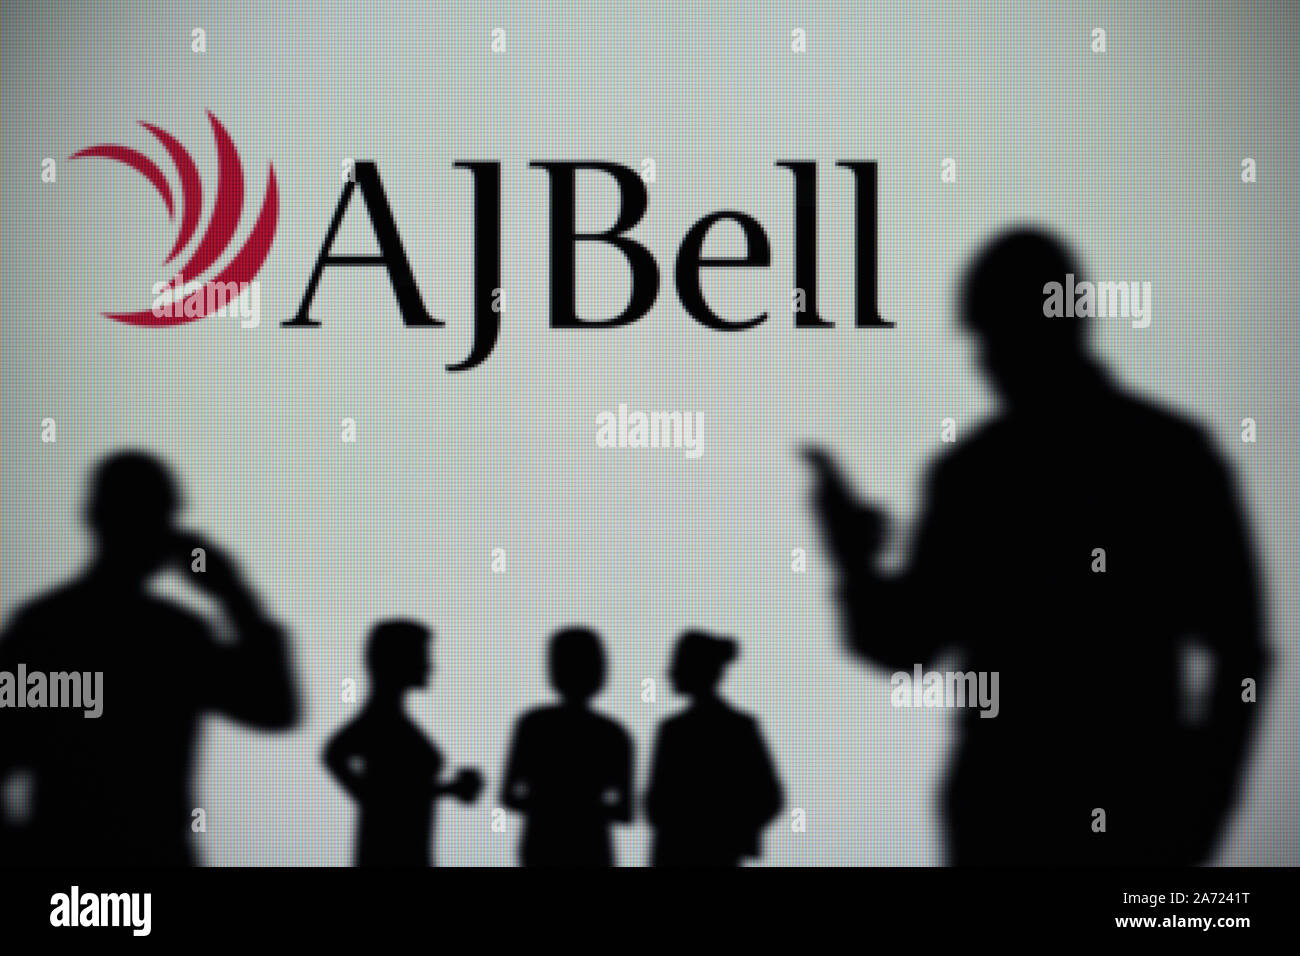 The AJ Bell logo is seen on an LED screen in the background while a silhouetted person uses a smartphone (Editorial use only) Stock Photo